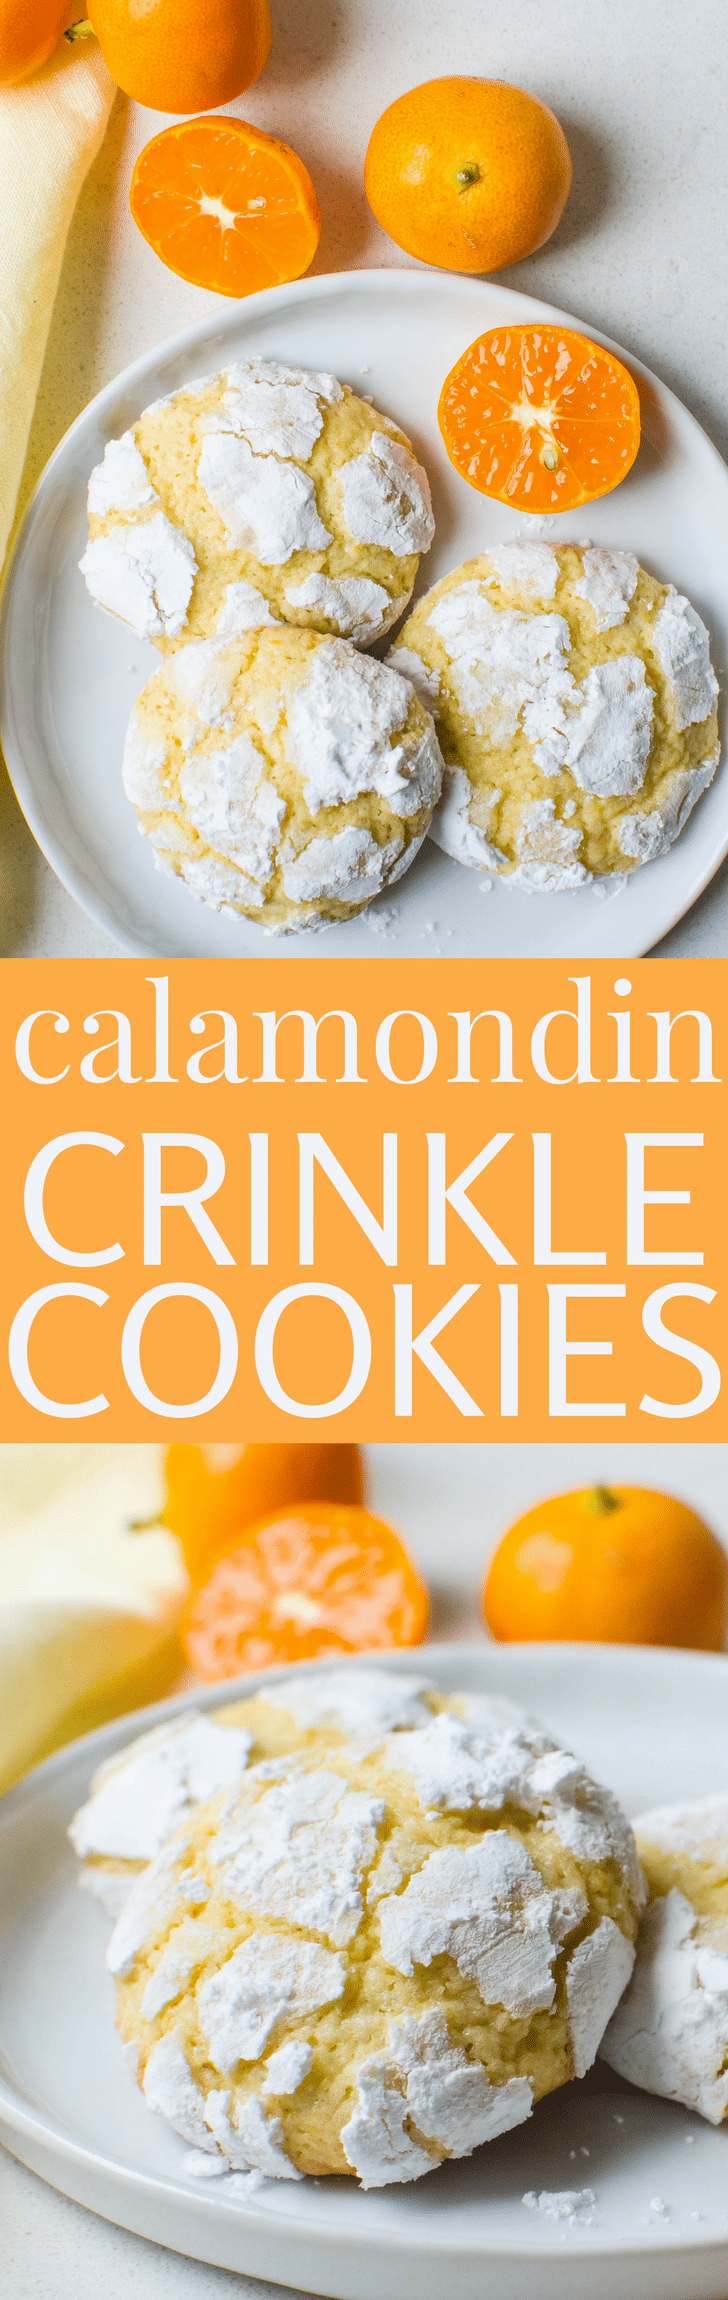 If you have an ornamental calamondin tree, then you'll love these Citrusy Calamondin Crinkle Cookies. This easy crinkle cookie recipe is an ideal way to use calamondin oranges. A cheery Easter cookie, this calamondin recipe is a lovely departure from the ordinary. #cookies #crinklecookies #orange #calamondinorange #calamondinorangerecipe #eastercookies #springcookies #christmascookies #calamondinrecipe #calamondinrecipes #powderedsugar #citruscookies #keylimecookies #easycookierecipe